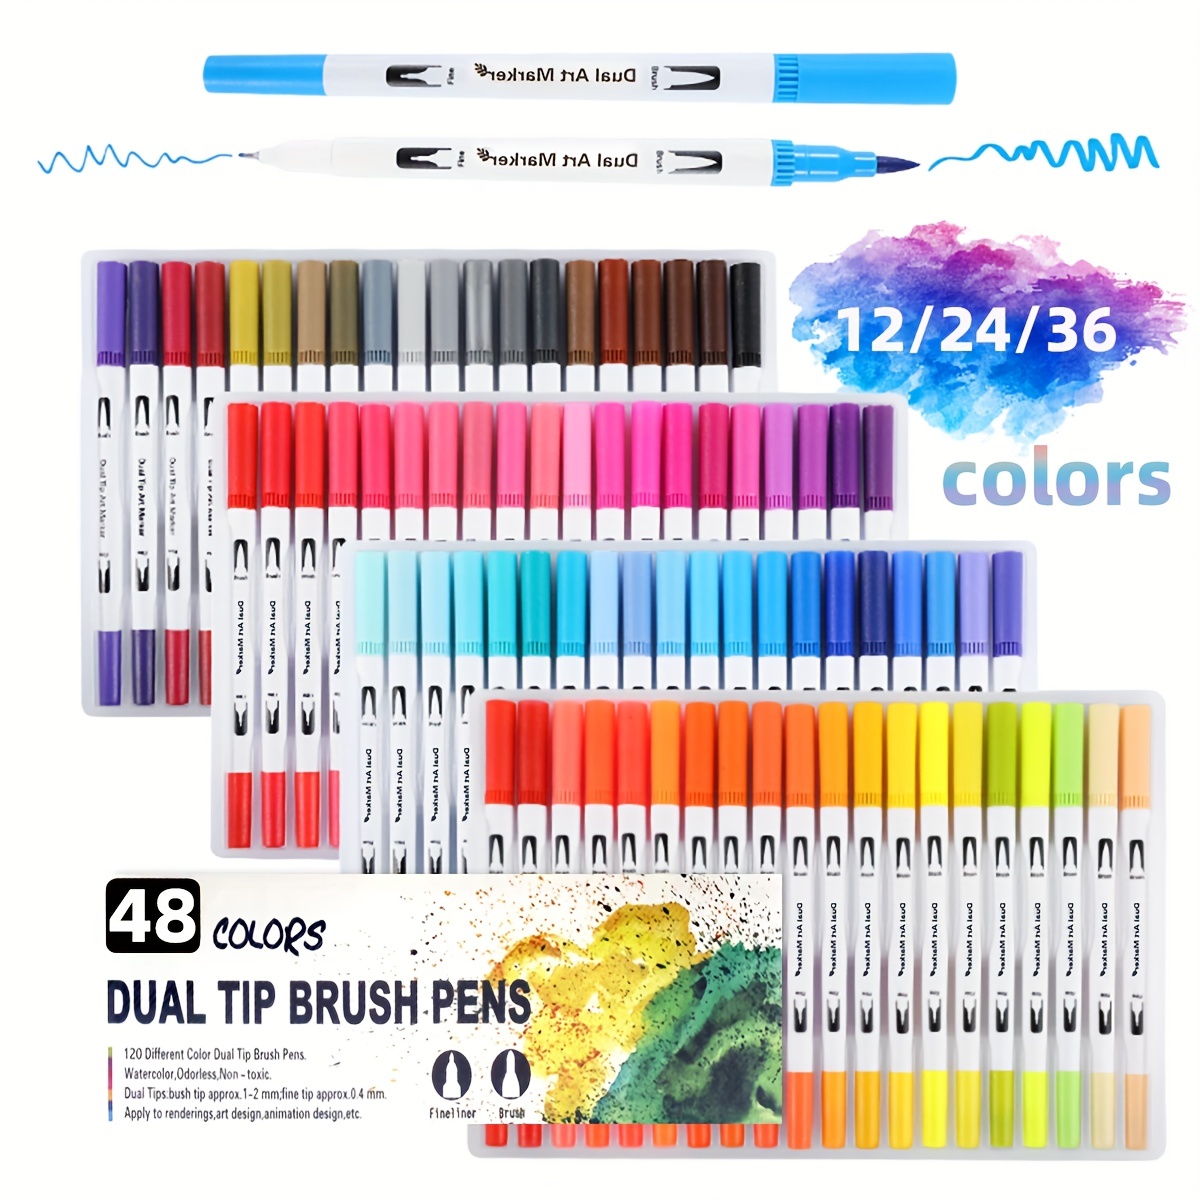 35 Dual Markers Pen for Adult Coloring Book, Coloring Brush Art Marker,  Fine Tip Colored Pens for Kids, Bullet Journaling Drawing Planner